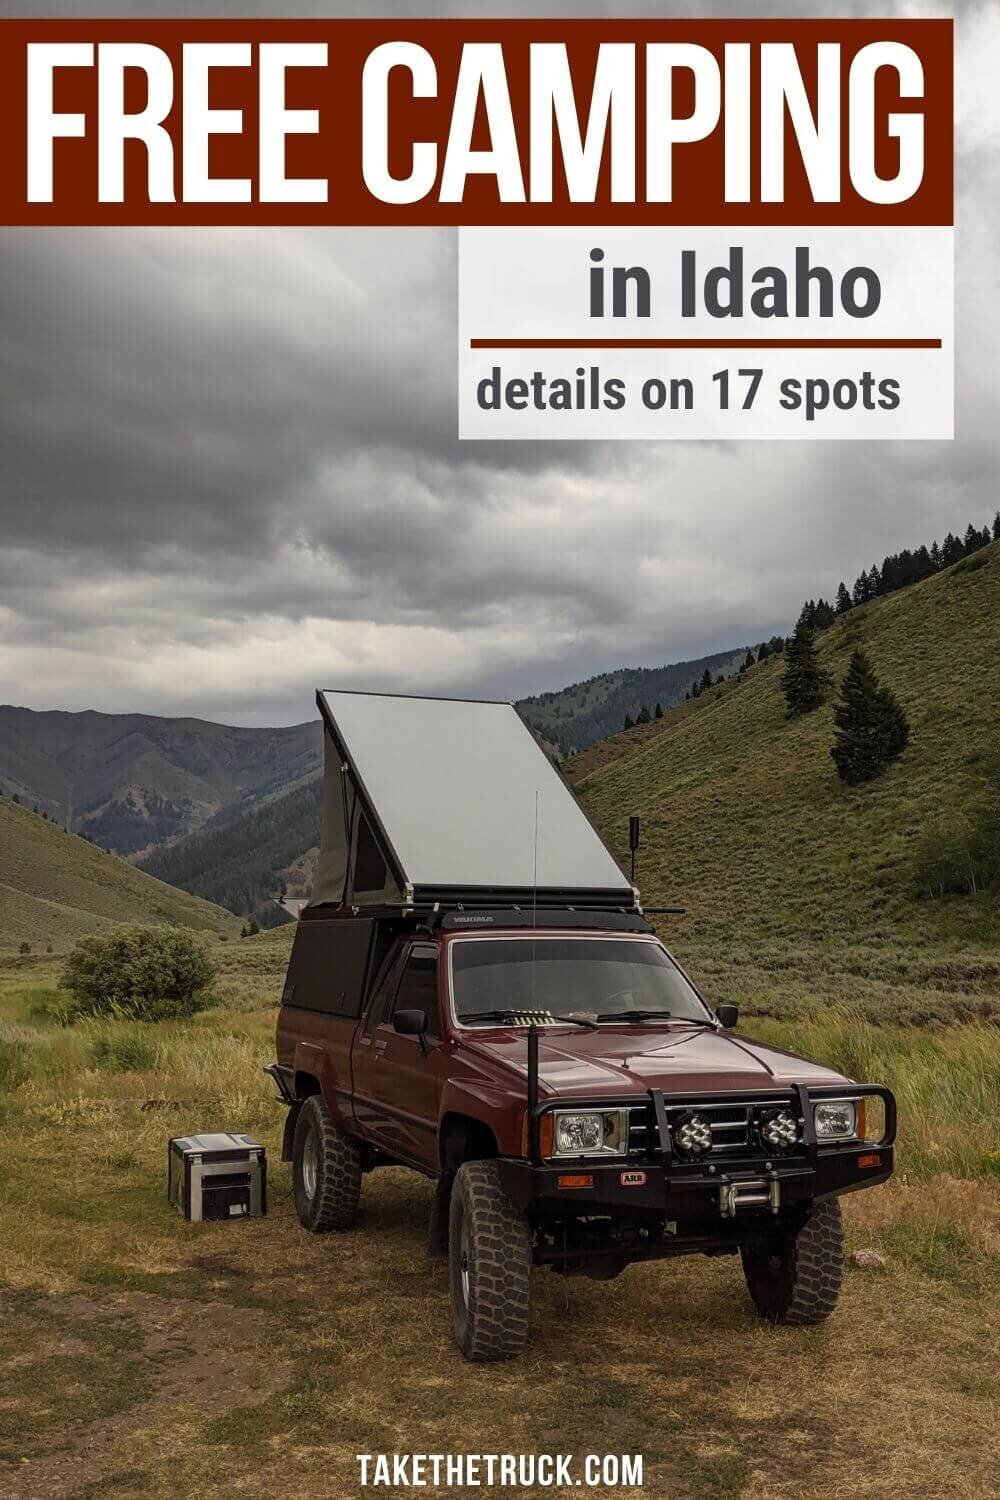 Looking for free camping in Idaho? This post gives all the details you’ll need about 17 different boondocking spots - either blm camping or national forest camping in Idaho.